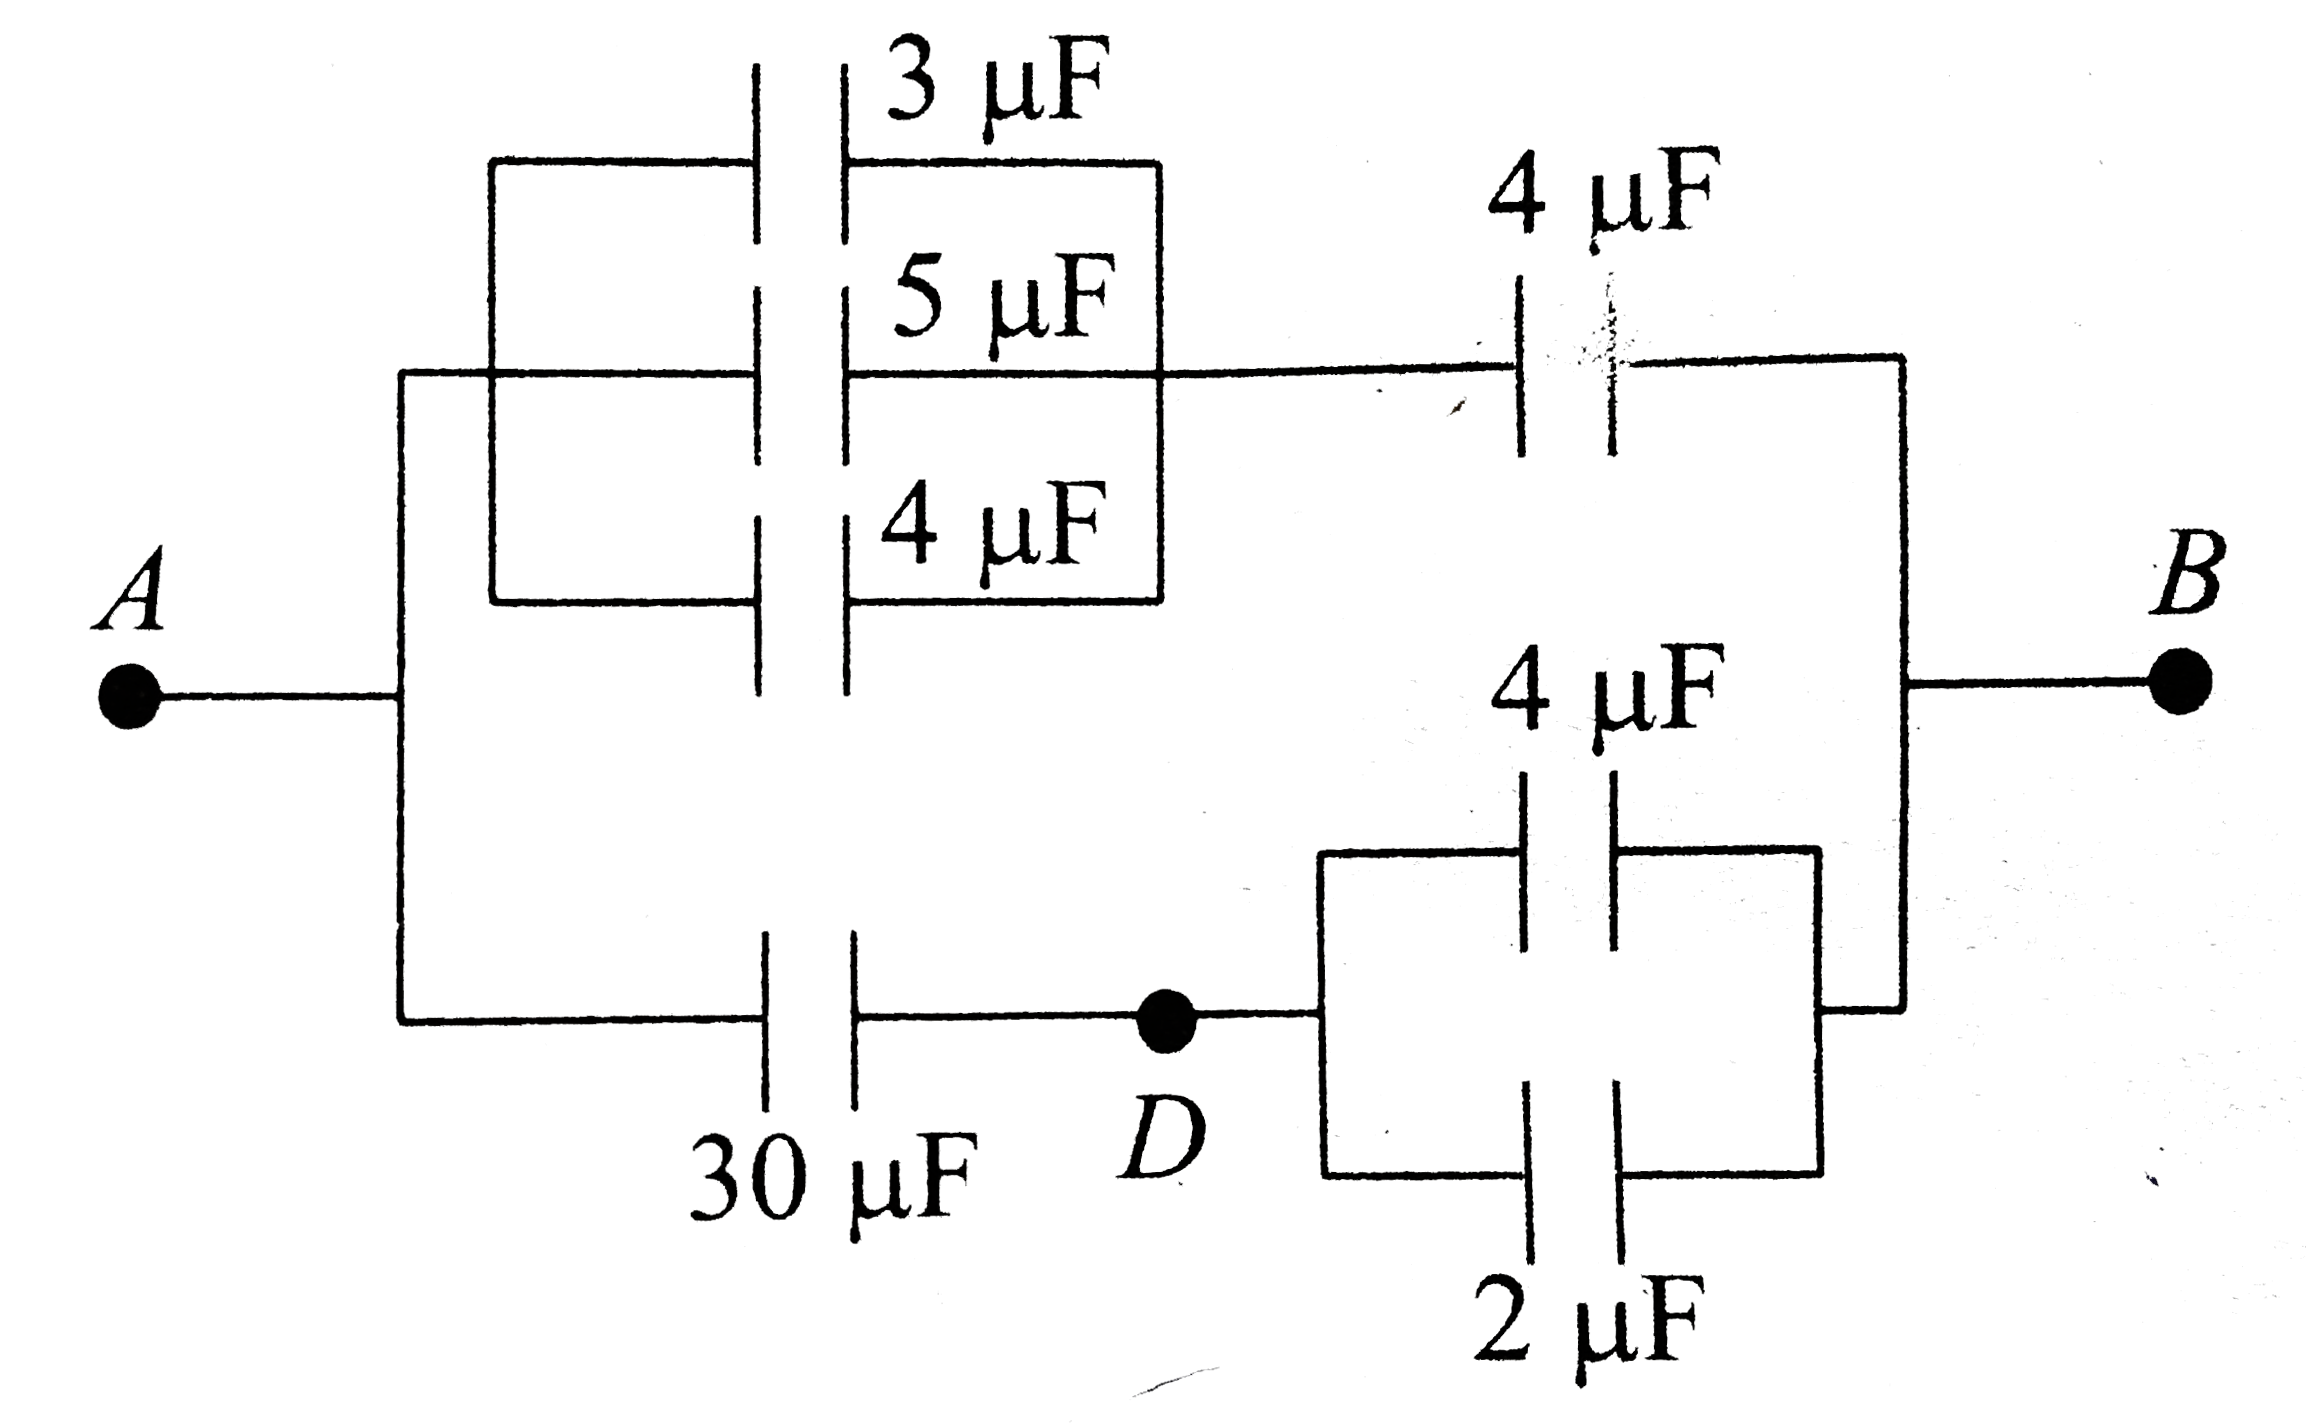 Several capacitors are connected as shown in. If the charge on the 5 muF capacitor is 120 muC, the potential between points A and D is   .